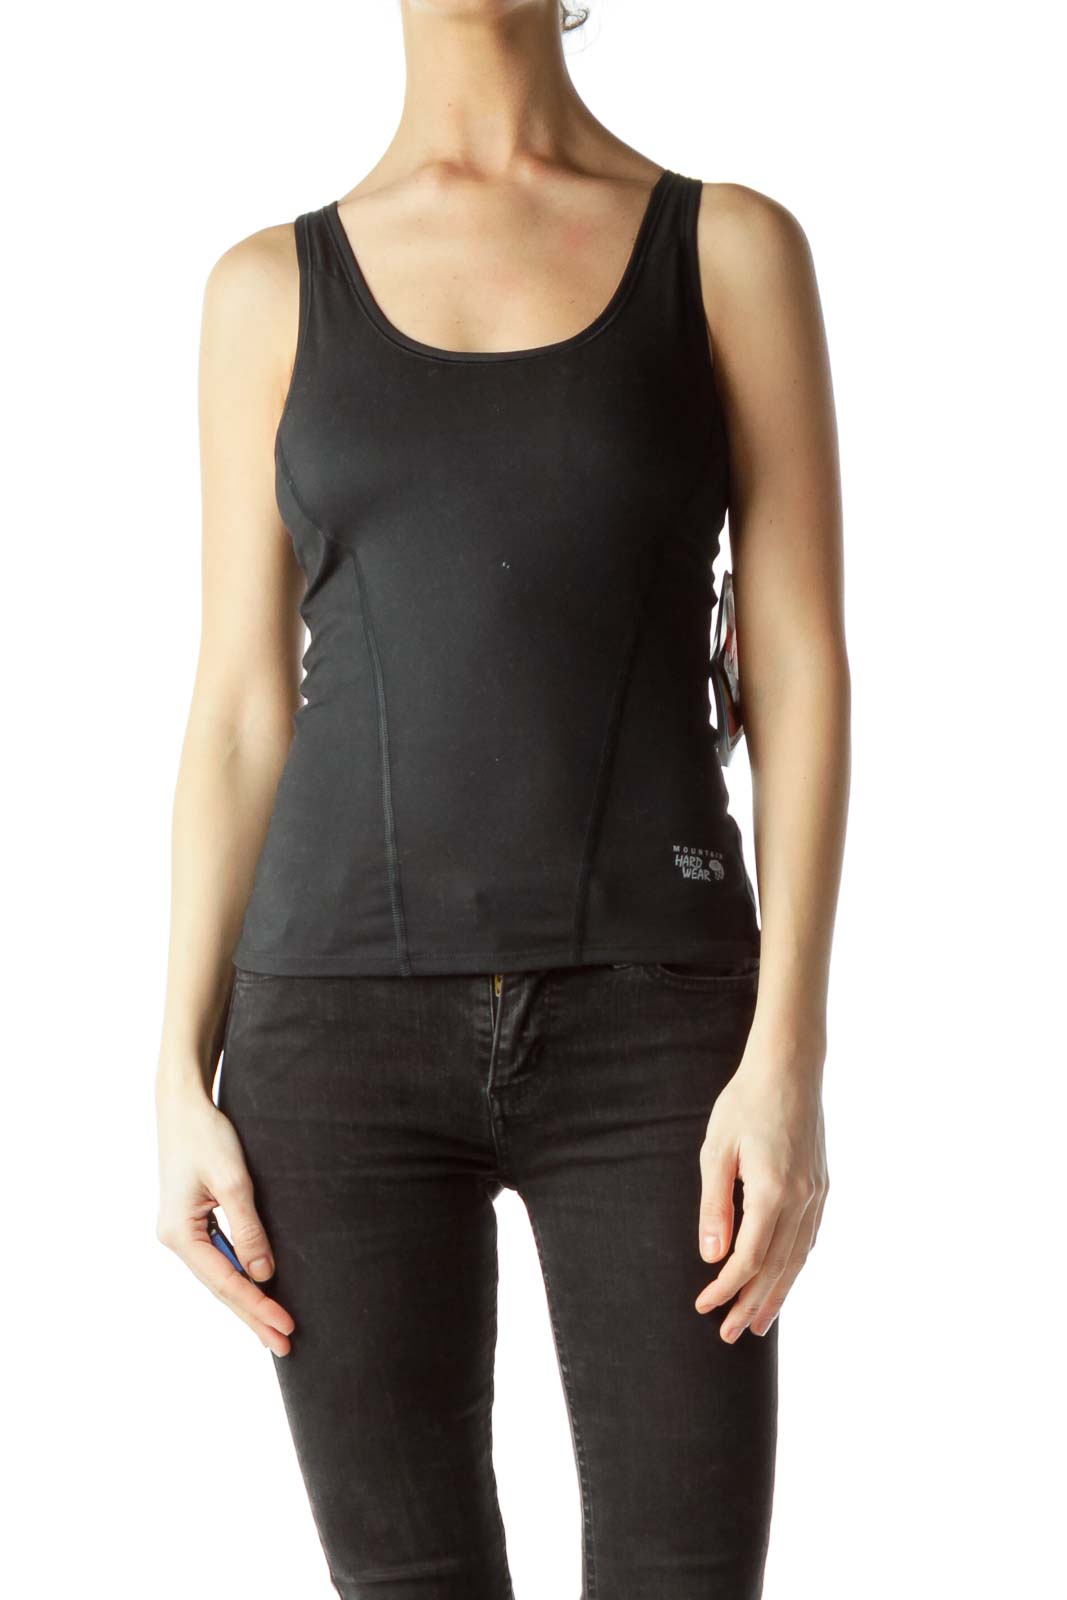 Black Racerback Fitted Sports Top Front